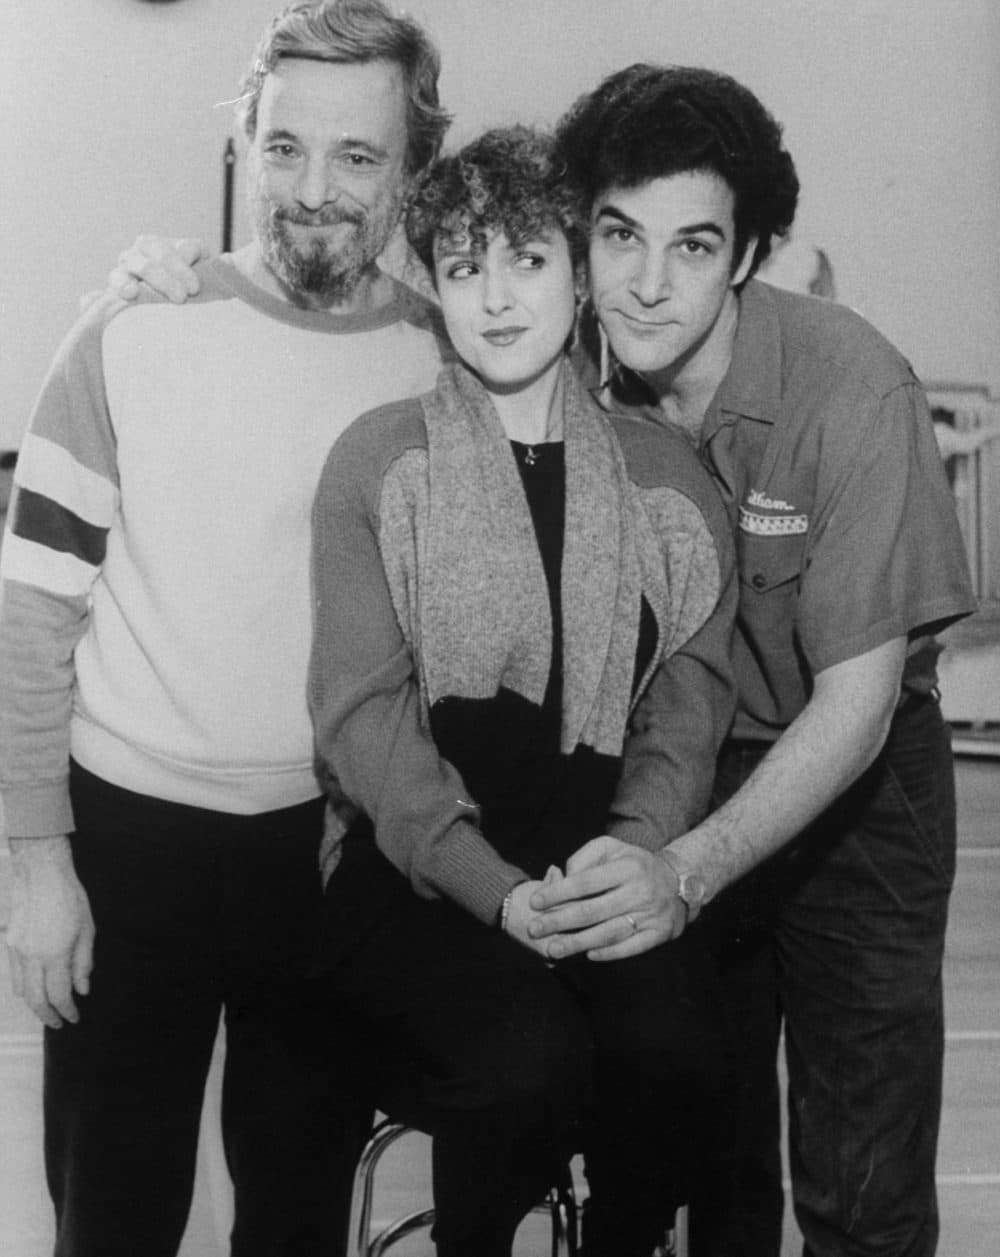 Composer Stephen Sondheim with actors Bernadette Peters and Mandy Patinkin at rehearsal for the Broadway production of &quot;Sunday in the Park with George&quot; in 1984. (Martha Swope/Billy Rose Theatre Division)